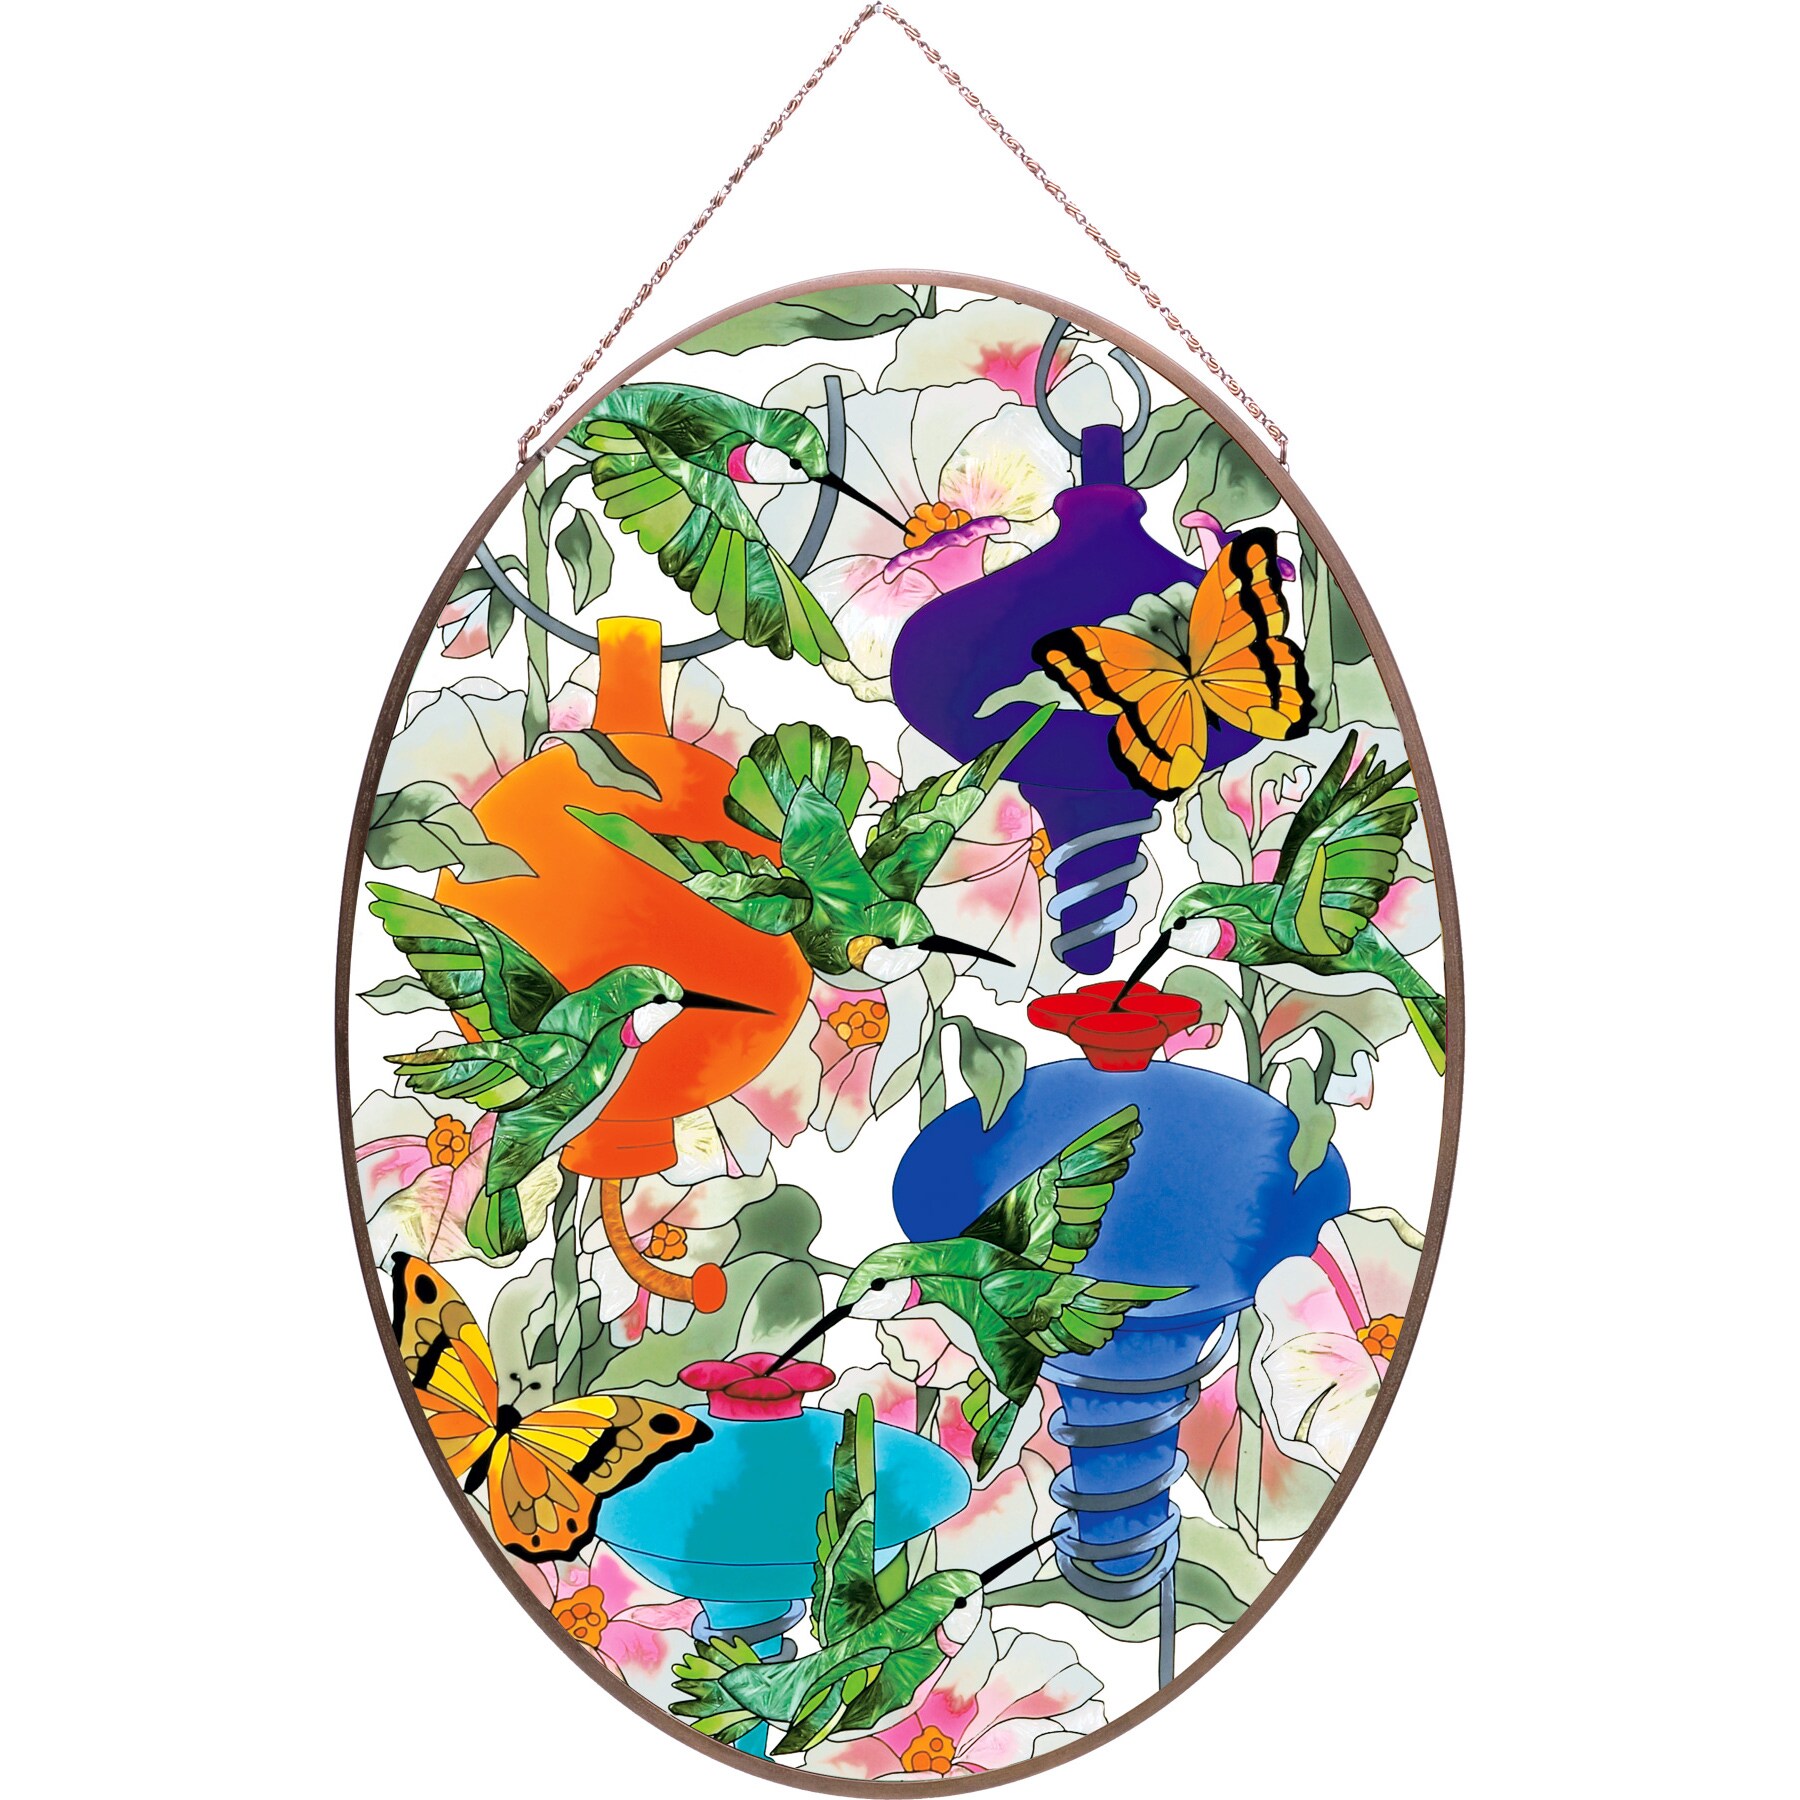 Joan Baker Hummingbird Feeders Glass Art Panel (LargeSubject AnimalsImage dimensions 14.25 inches X 19.25 inchesOuter dimensions 14.25 inches X 19.25 inchesThe digital images we display have the most accurate color possiable. However, due to difference